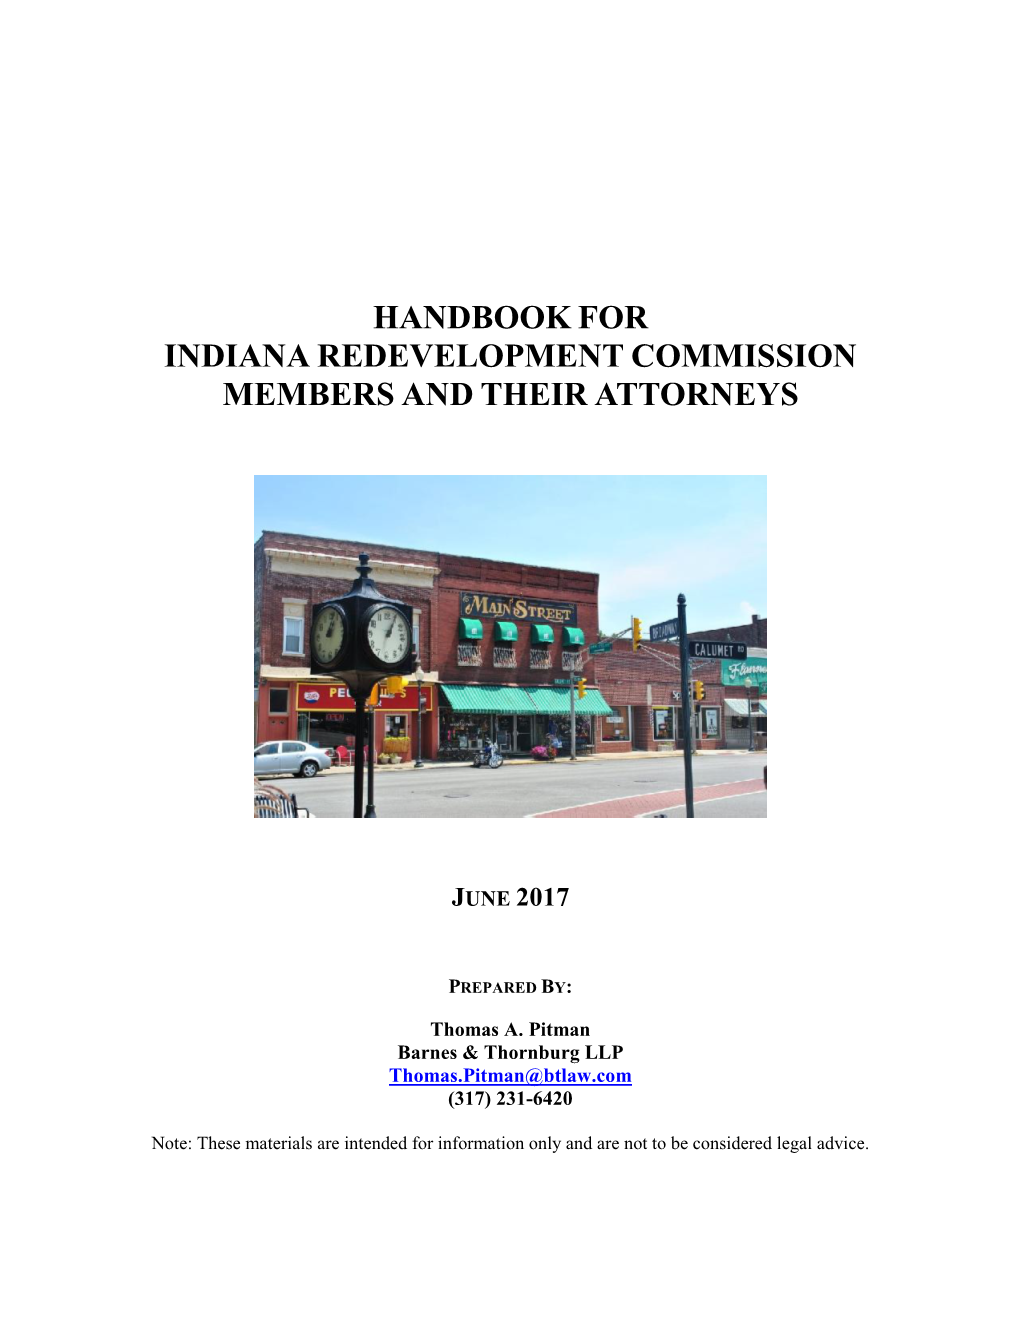 Indiana Redevelopment Handbook for Members and Attorneys